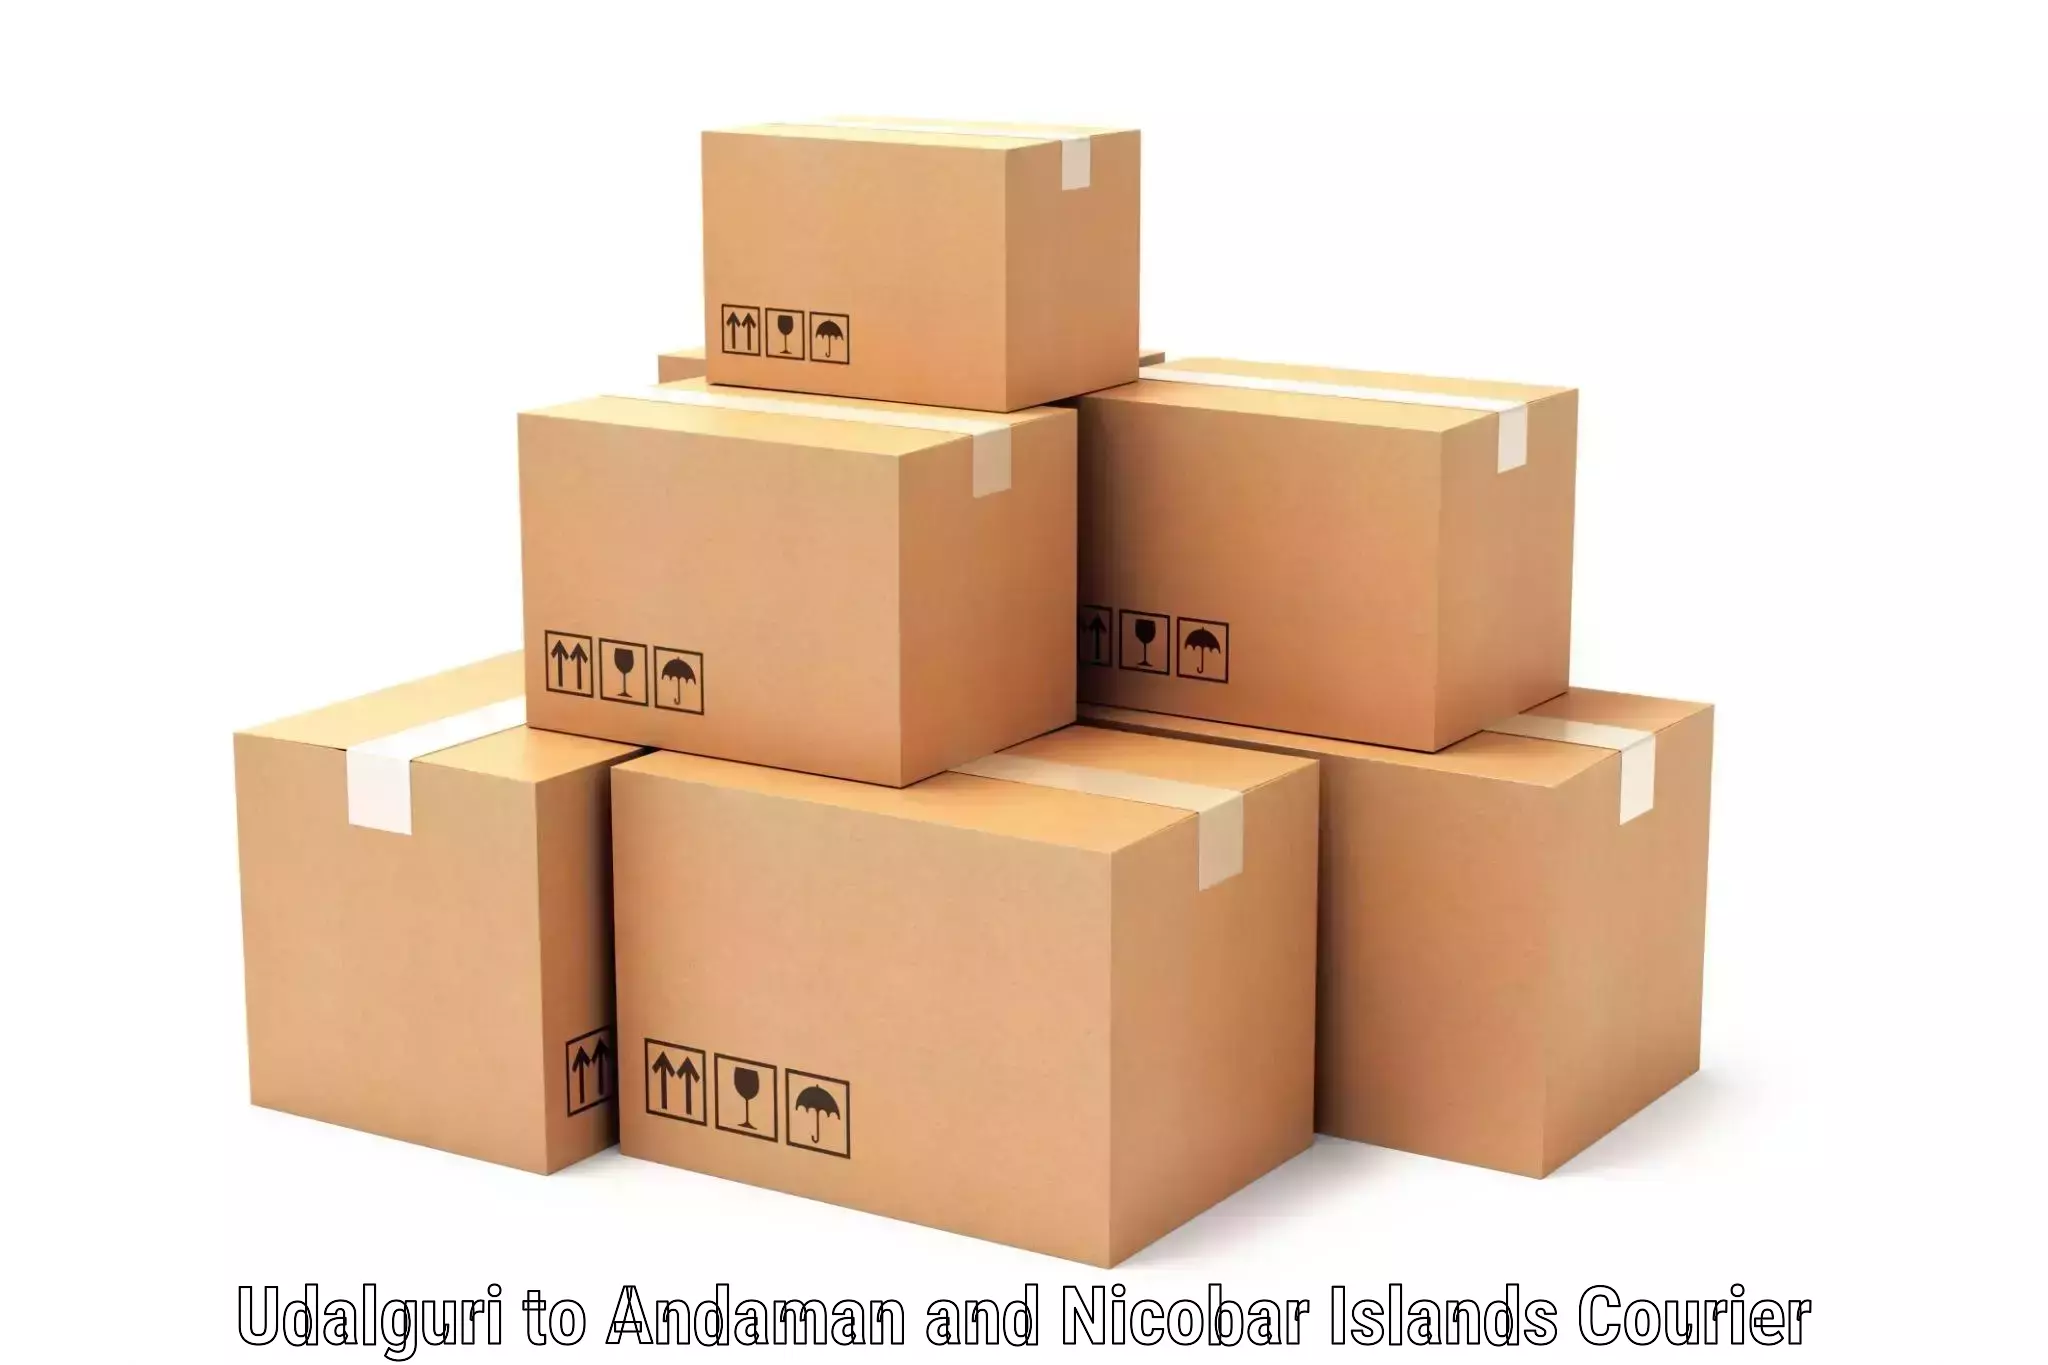 Digital shipping tools Udalguri to North And Middle Andaman